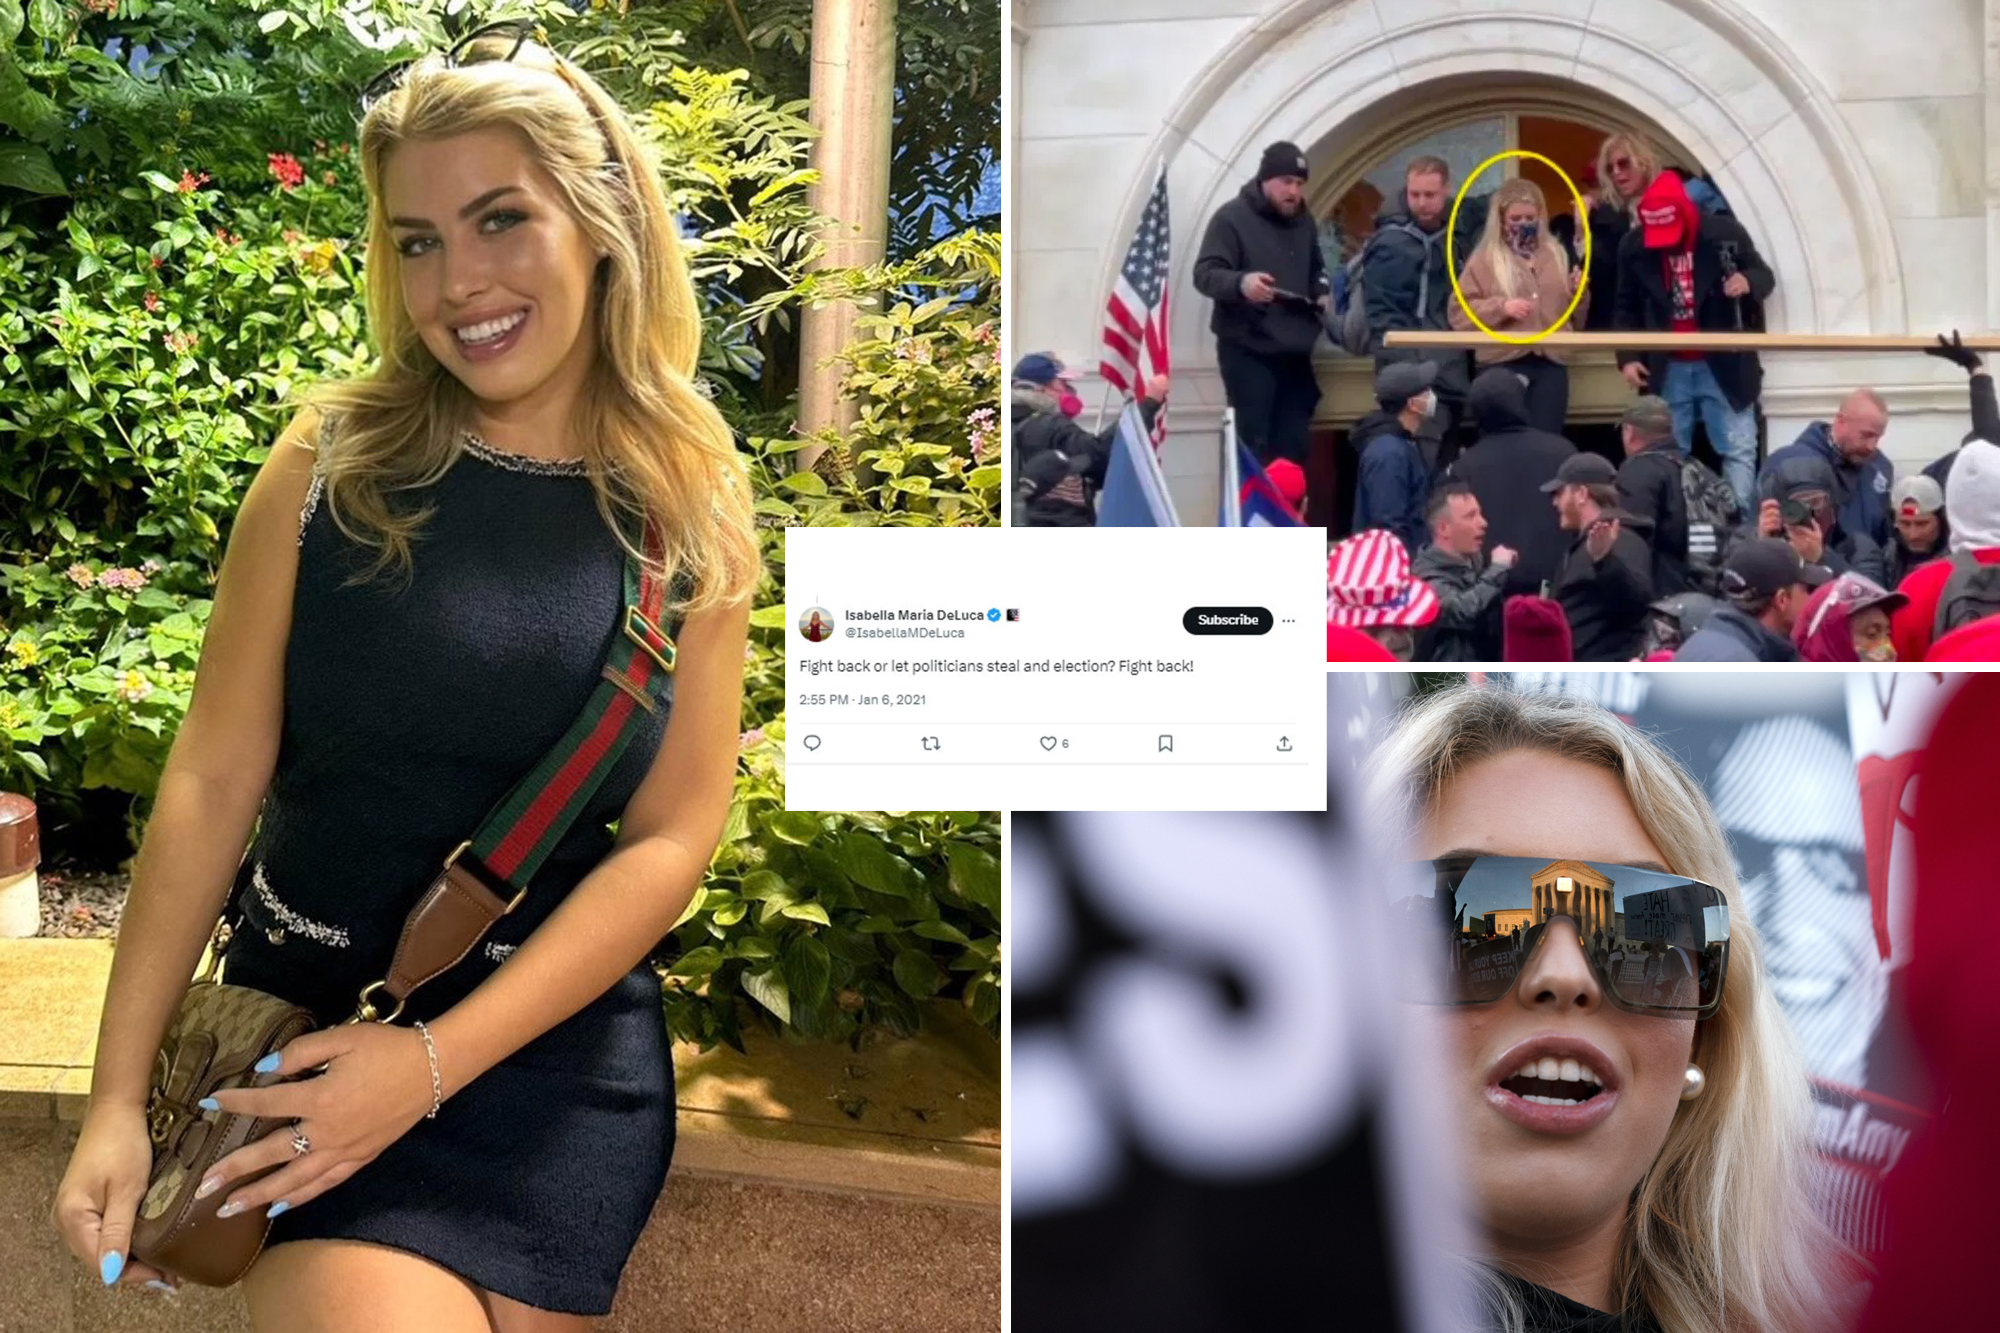 Social media influencer Isabella DeLuca charged in Jan. 6 Capitol riot